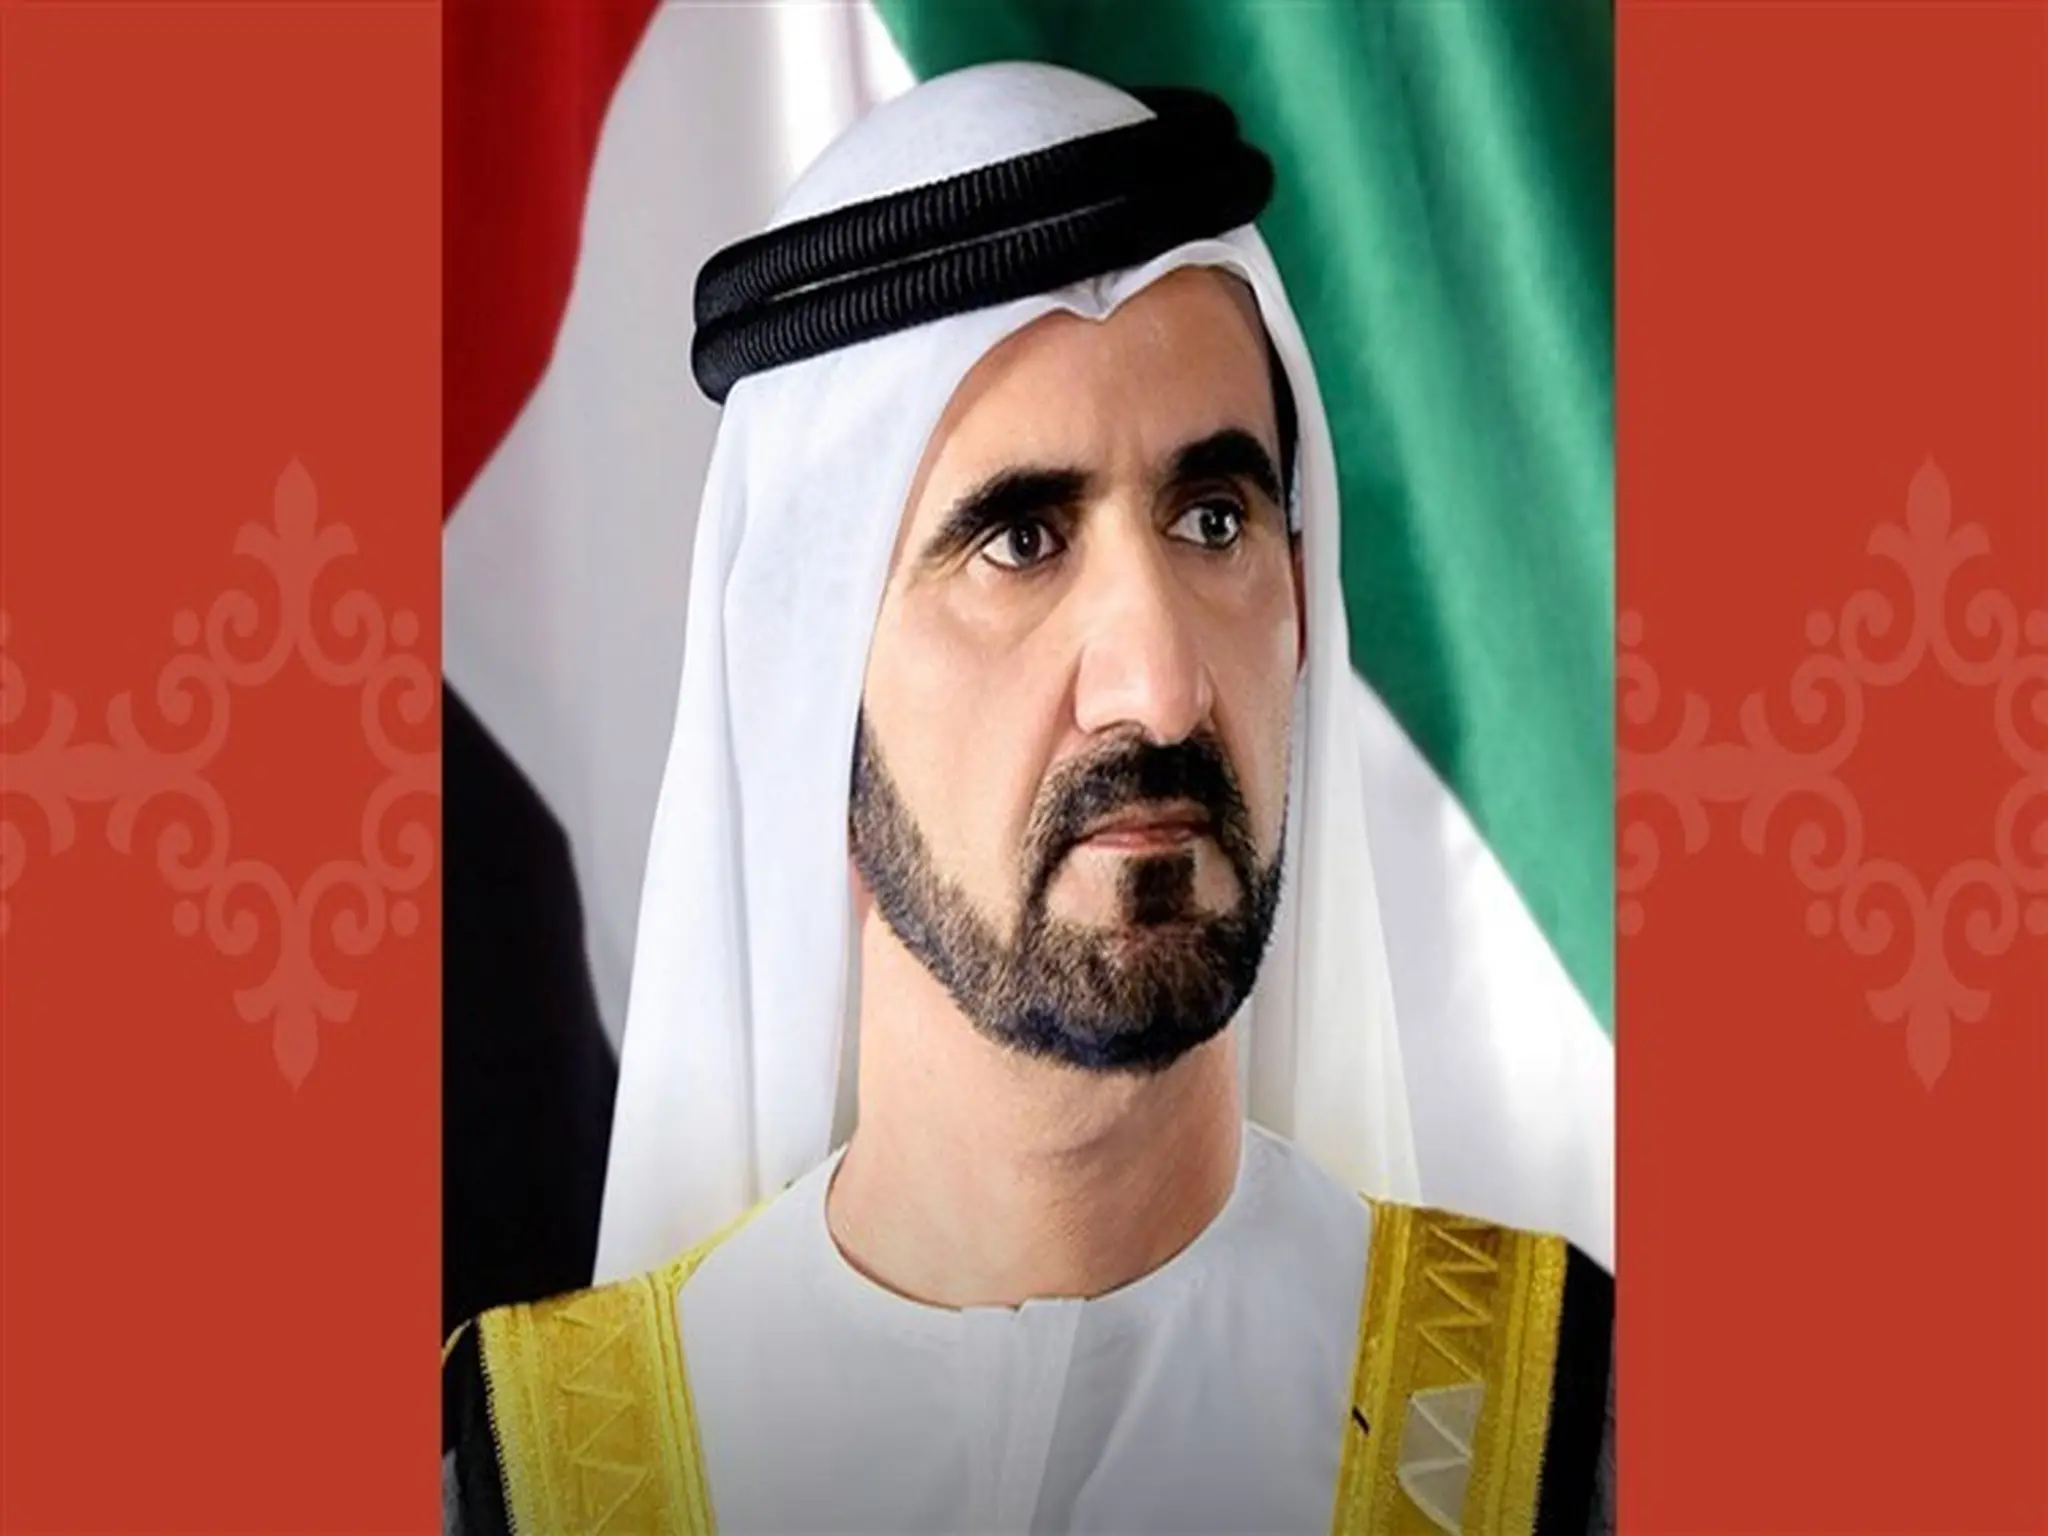 Urgent UAE: Statement to citizens and residents of Dubai